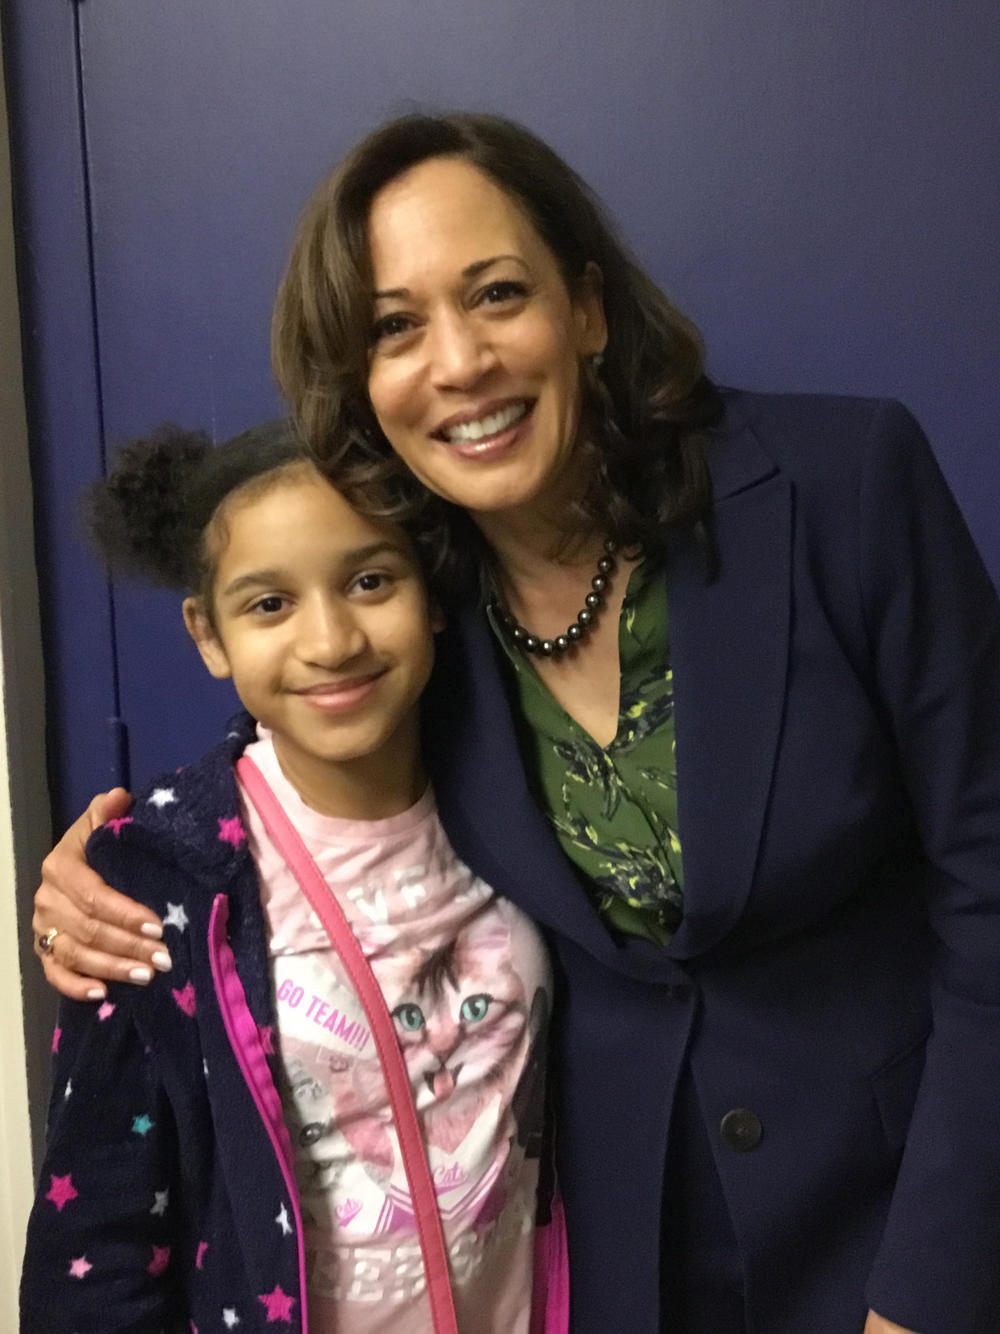 Harris poses with Jasmeen Coronado, then age 9, at a campaign event in Hemingway, S.C., last year.